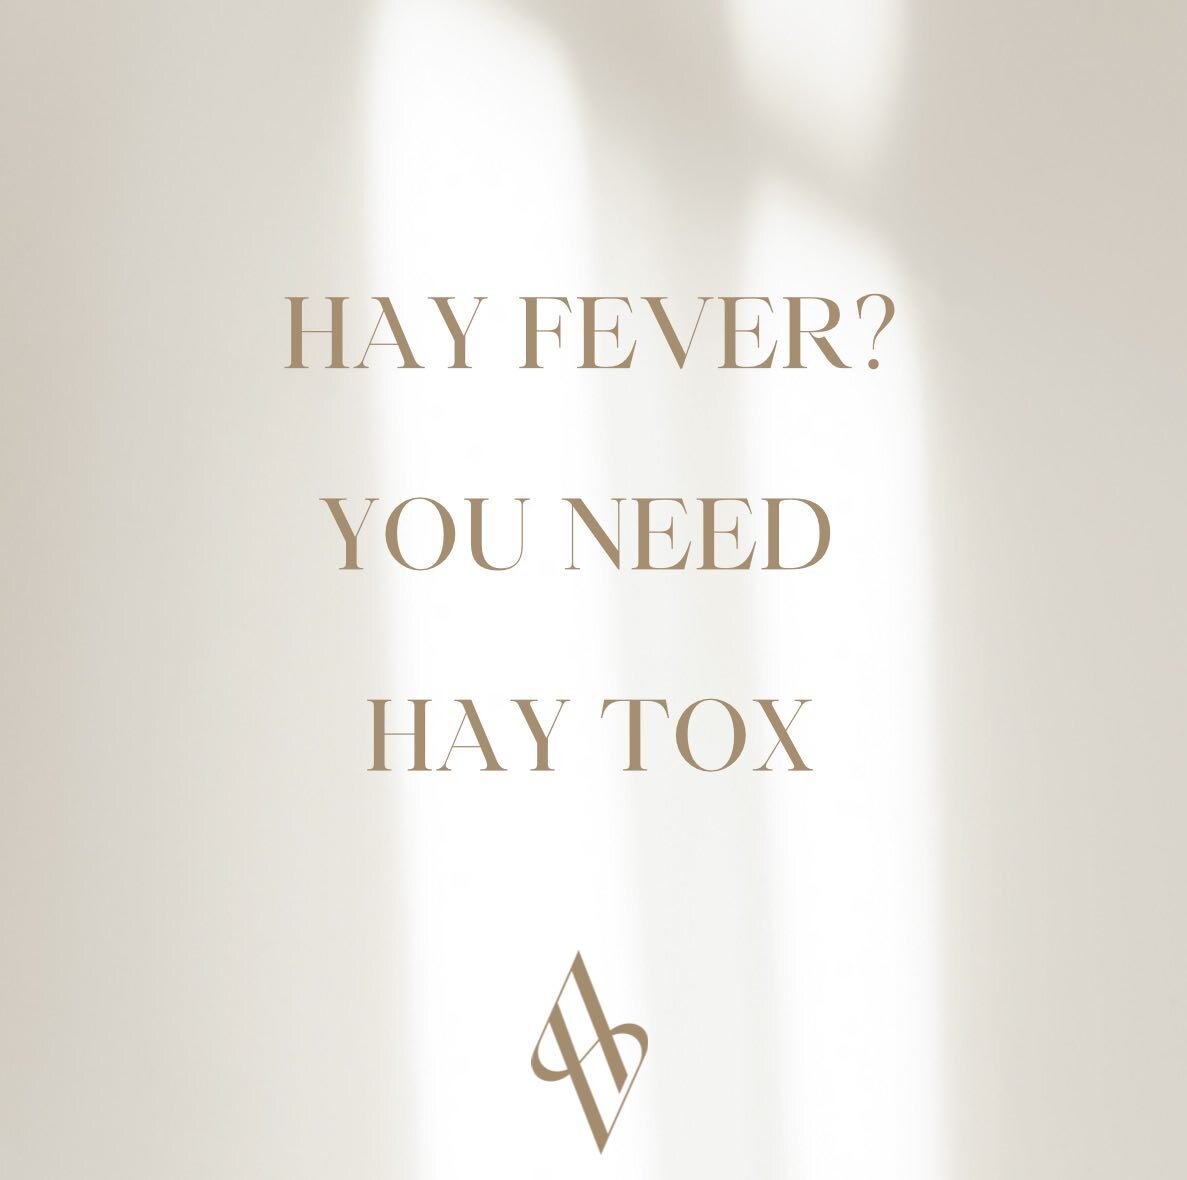 Although we are coming to the end of spring, hay fever is in full swing. 

Due to the high pollen count, it&rsquo;s going to be ramping up over the next few weeks.

This pain free, needle free treatment gives you relief from your hay fever symptoms f